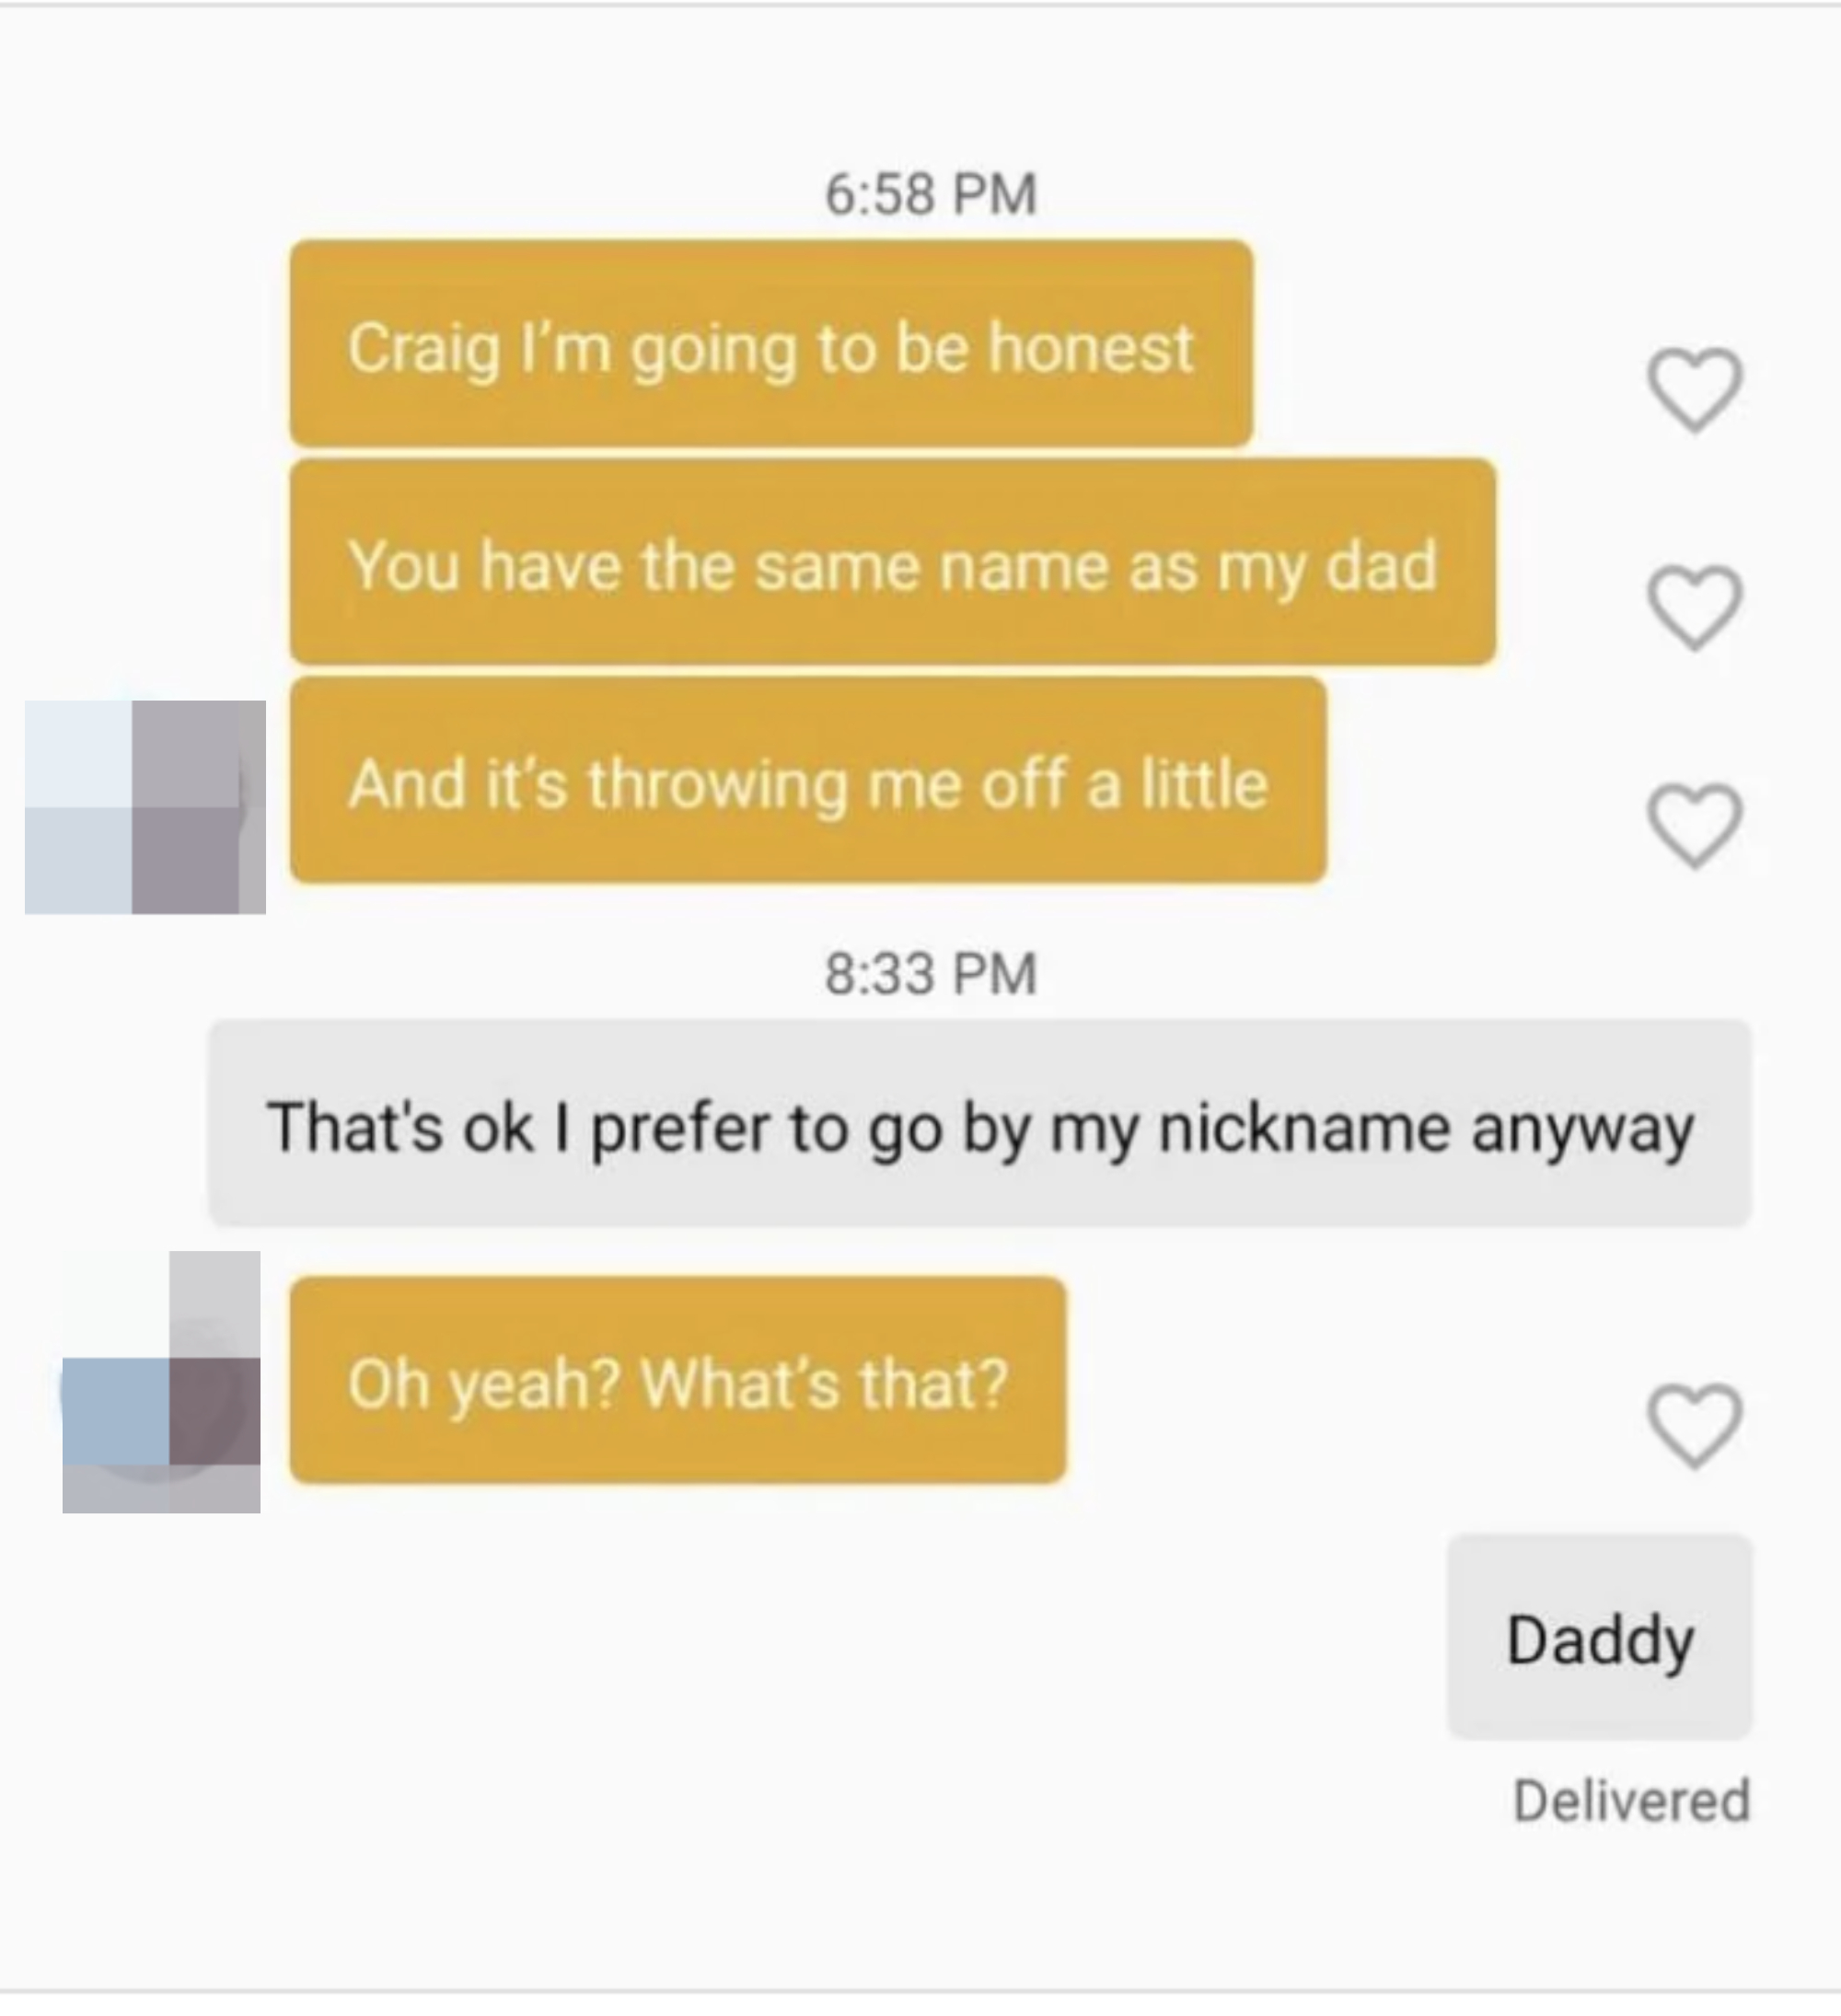 person on a dating app says craig is also the name of their dad so it&#x27;s throwing them off so the guy says, that&#x27;s ok i prefer to go by my nickname, daddy